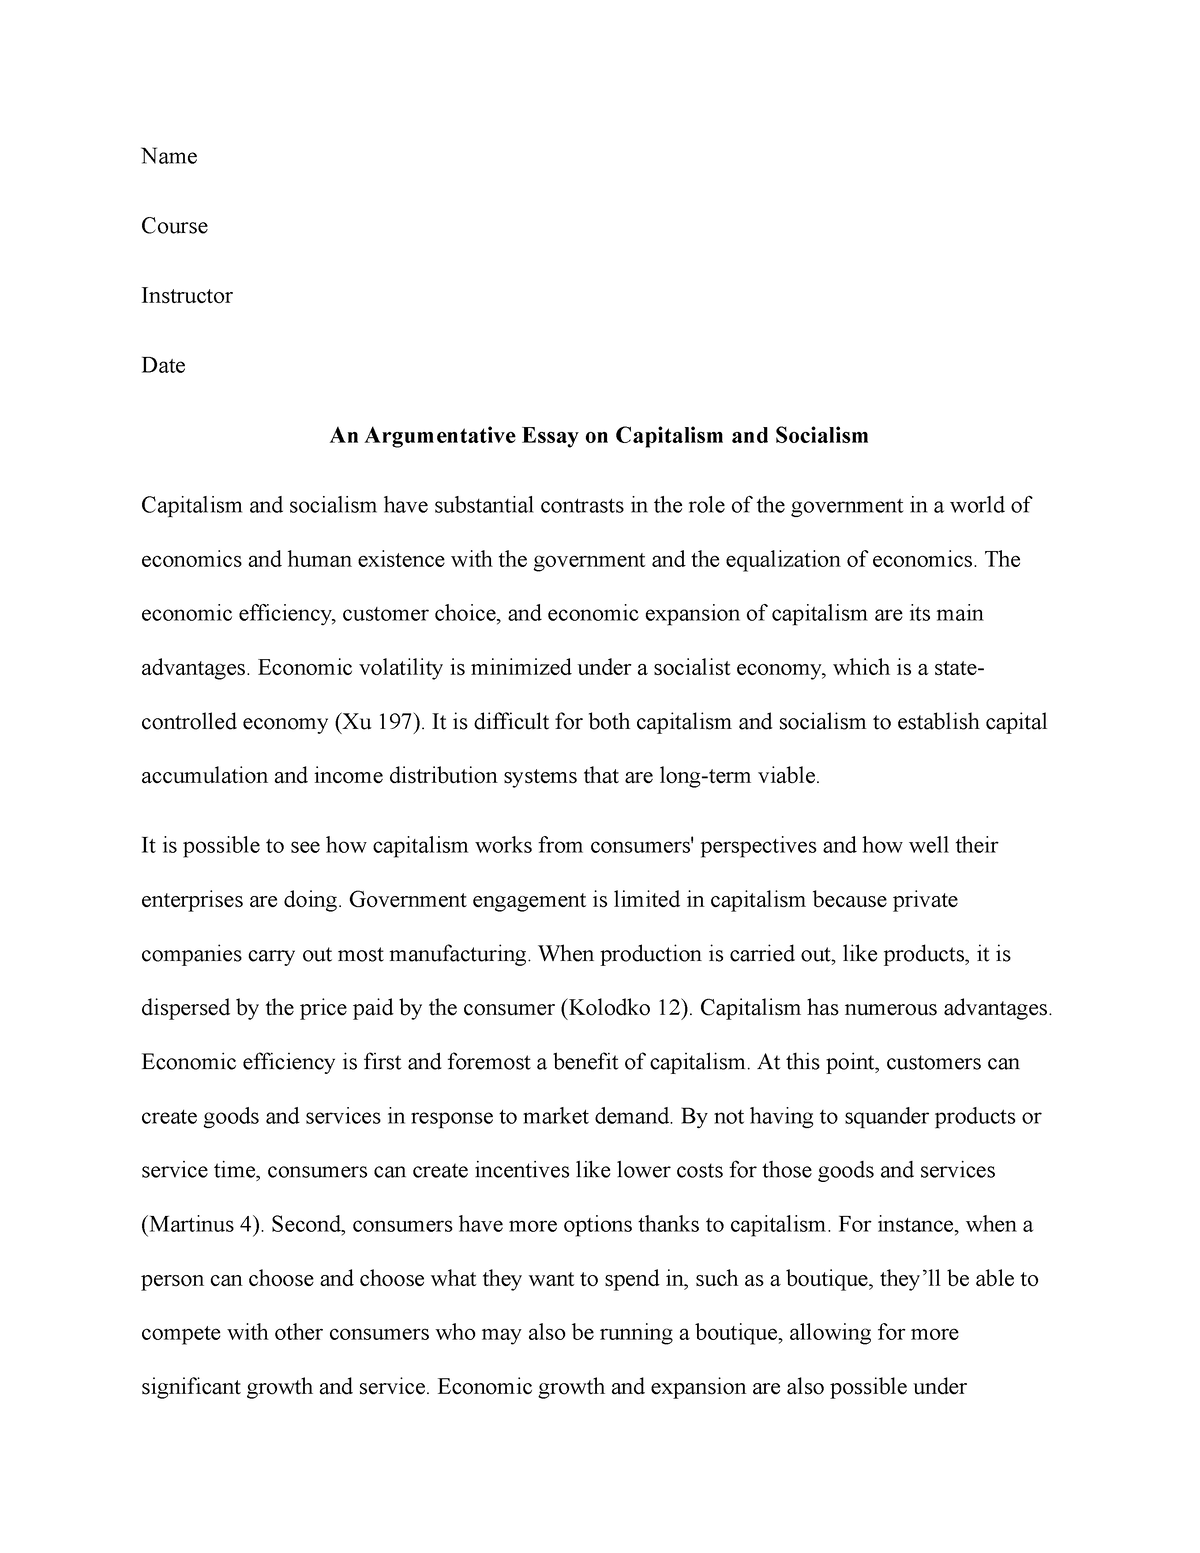 an outline for an argumentative essay about capitalism and socialism quizlet